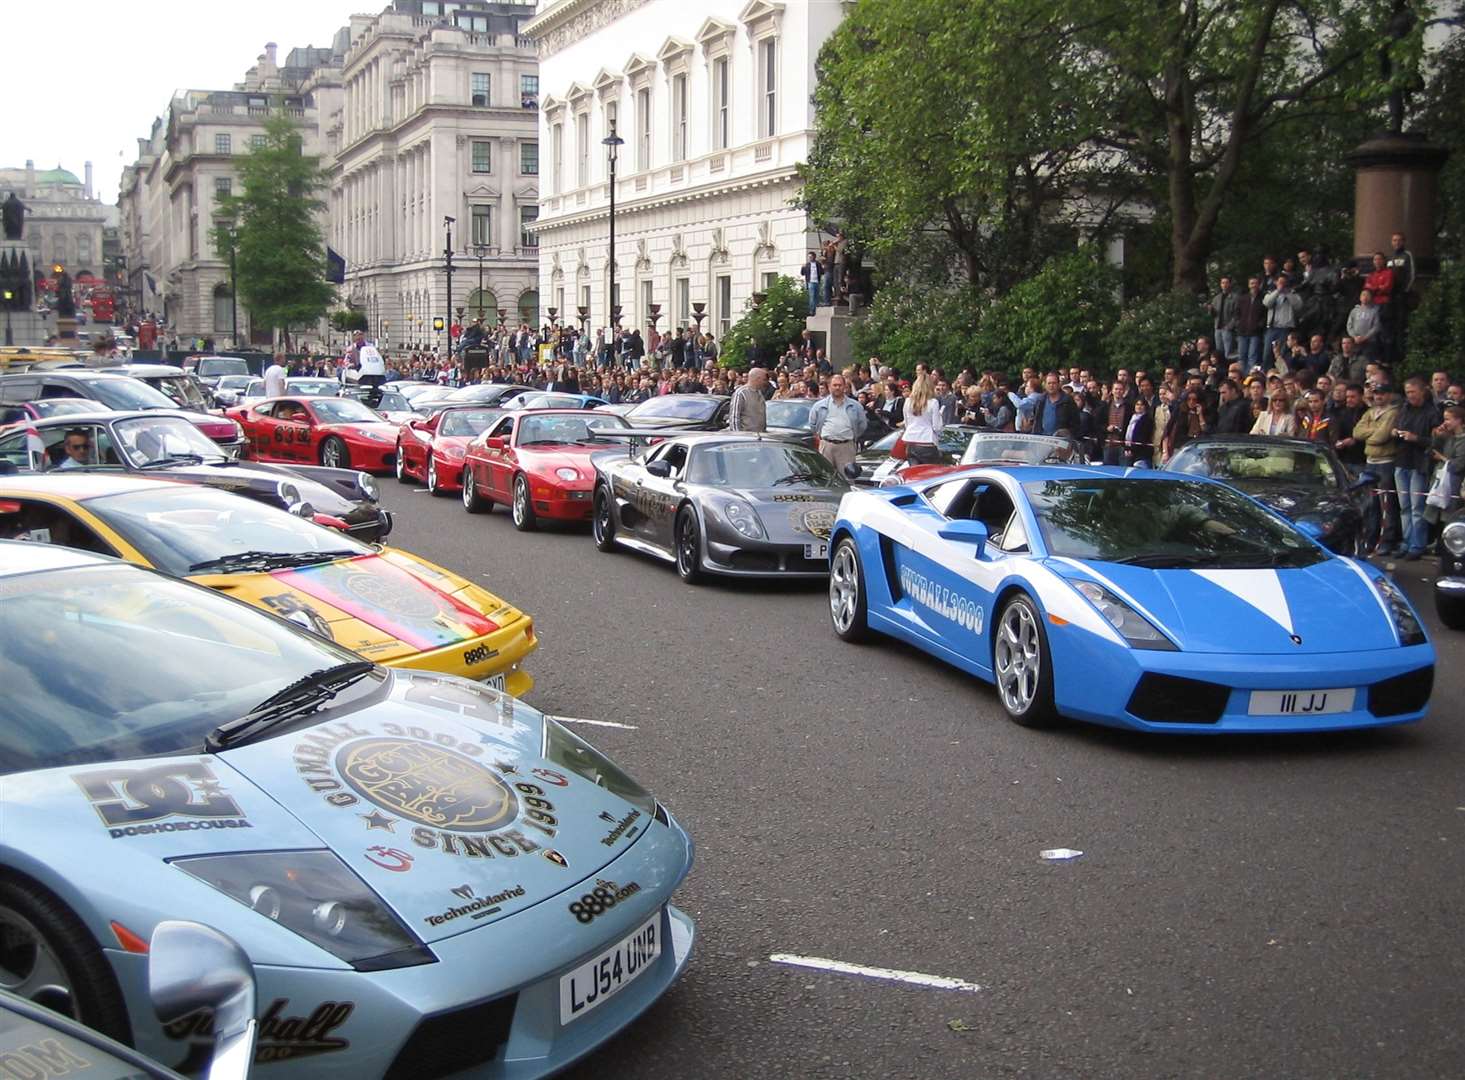 The London launch event in 2005 attracted a huge crowd